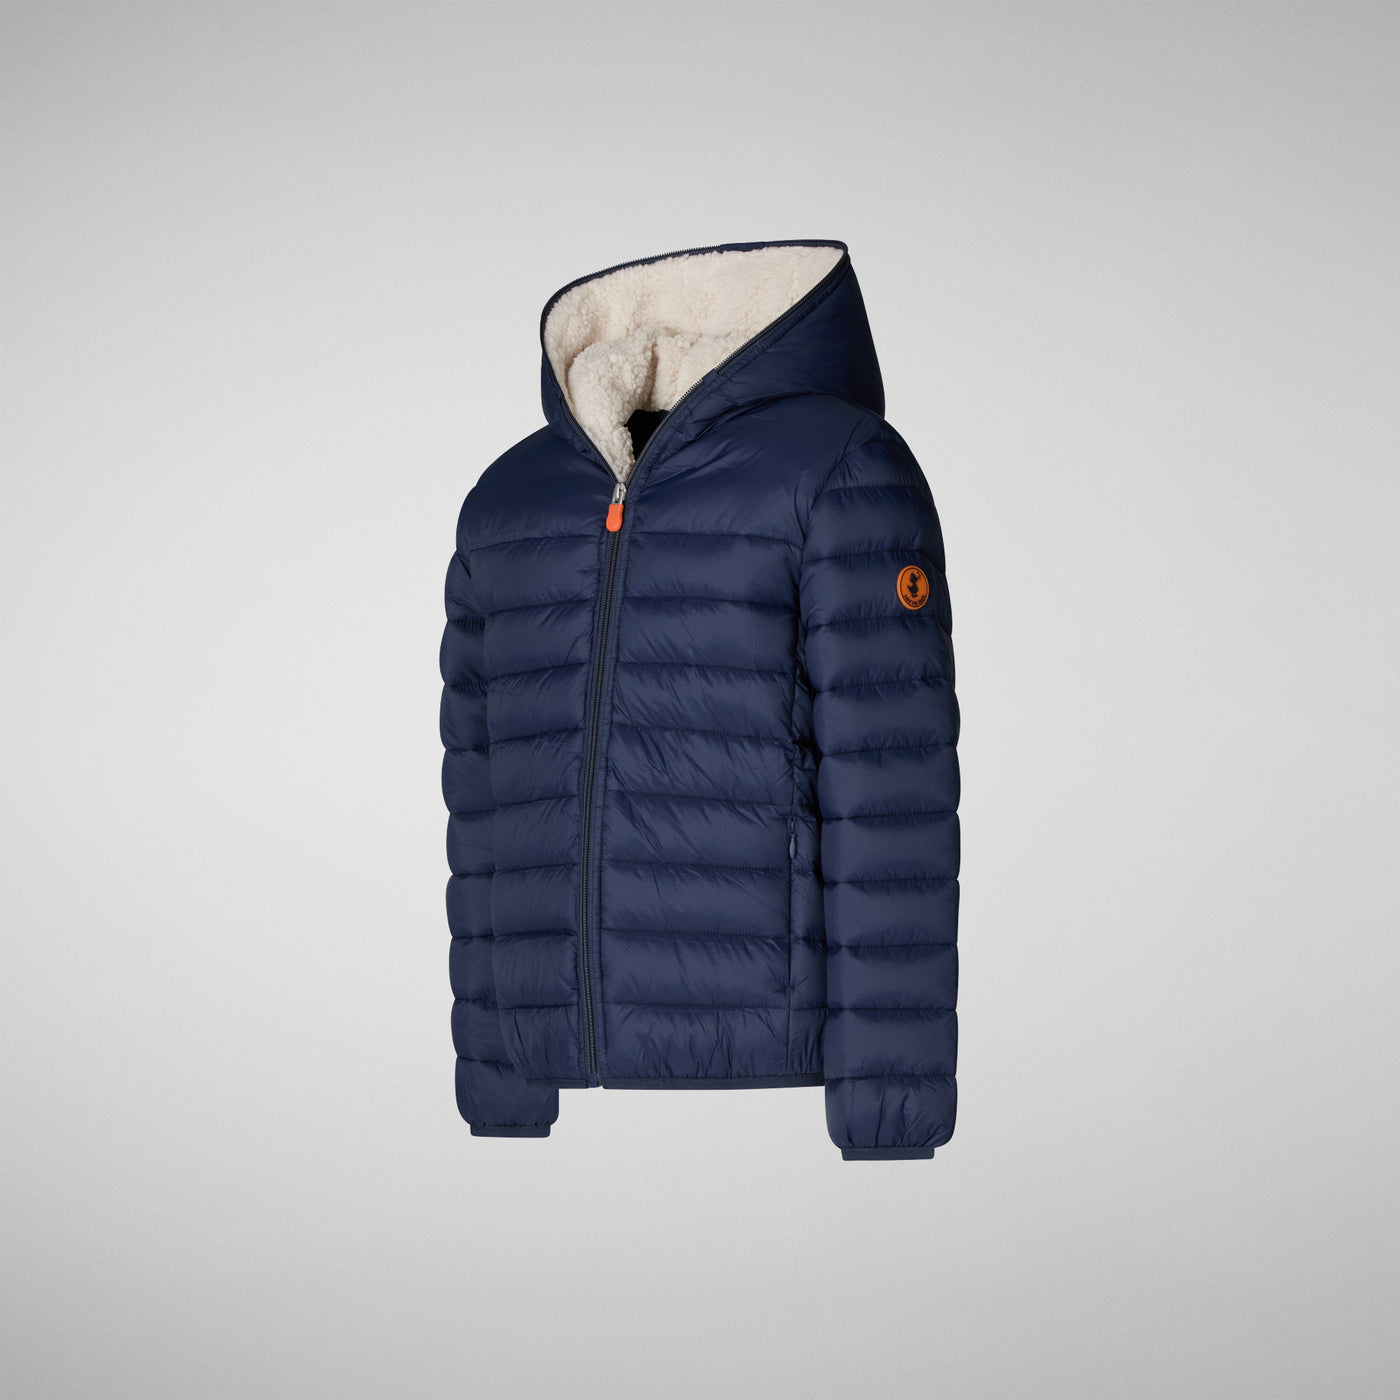 Product Side View of Boys' Rob Faux Fur Lined Hooded Puffer Jacket in Navy Blue